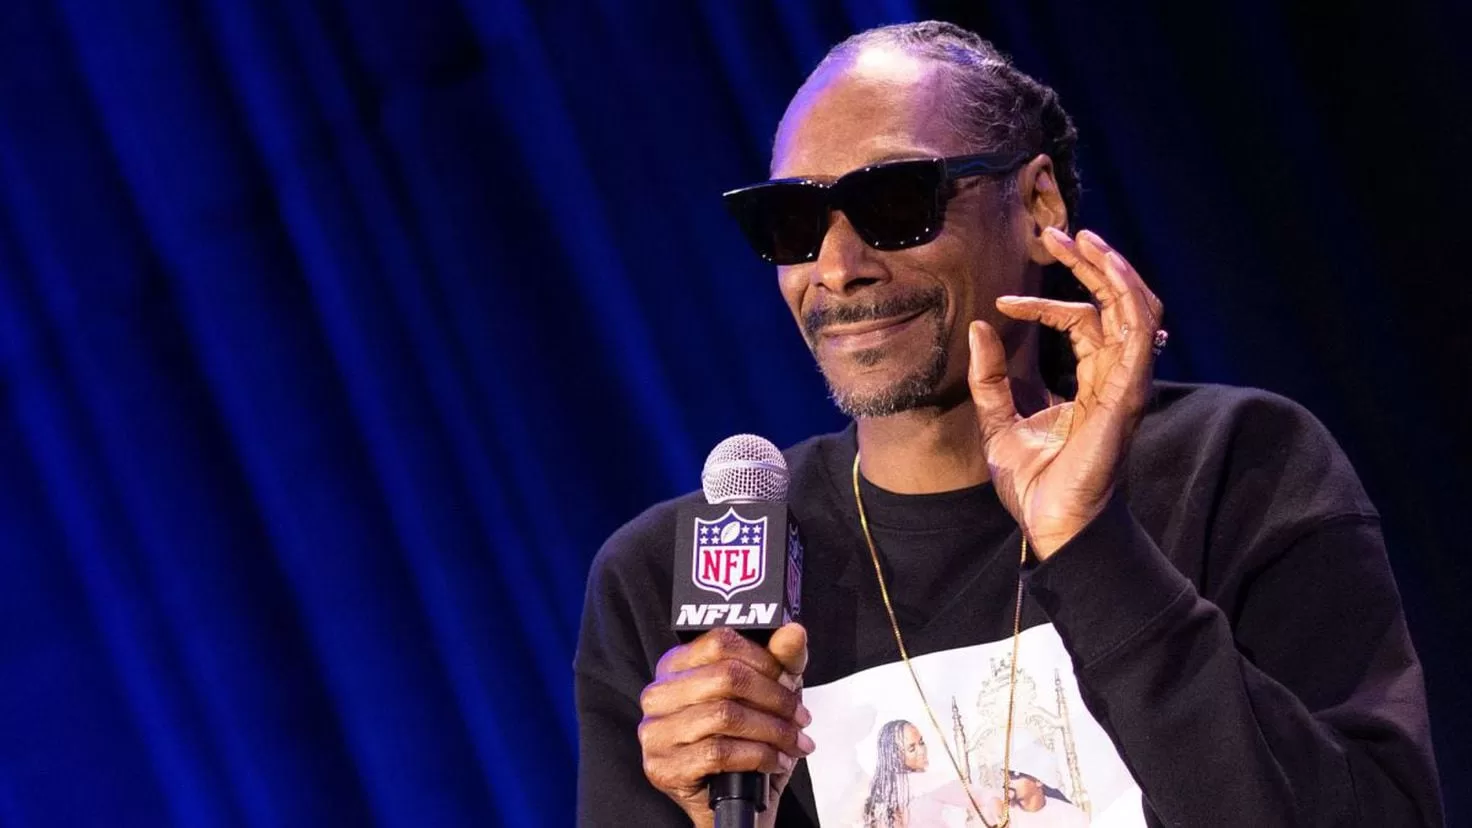 Snoop Dogg won't give up marijuana: it was all part of an ad
